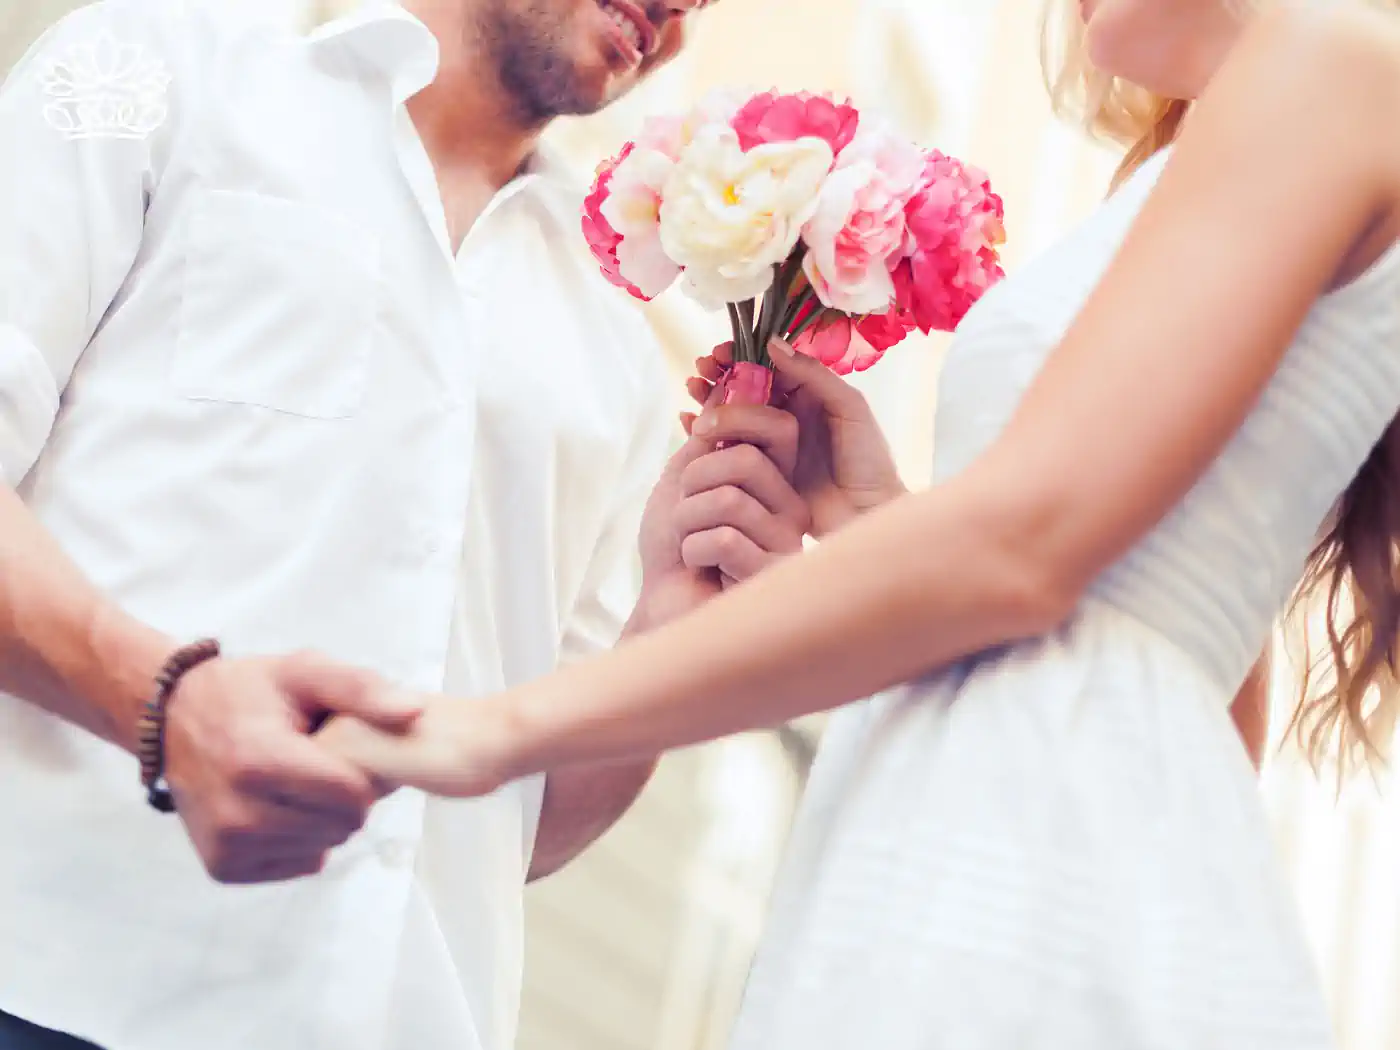 A man holds a woman's hand and presents her with a bouquet of vibrant pink and white flowers, capturing a romantic and intimate moment. Fabulous Flowers and Gifts delivered with heart. Valentine's Day Flowers.